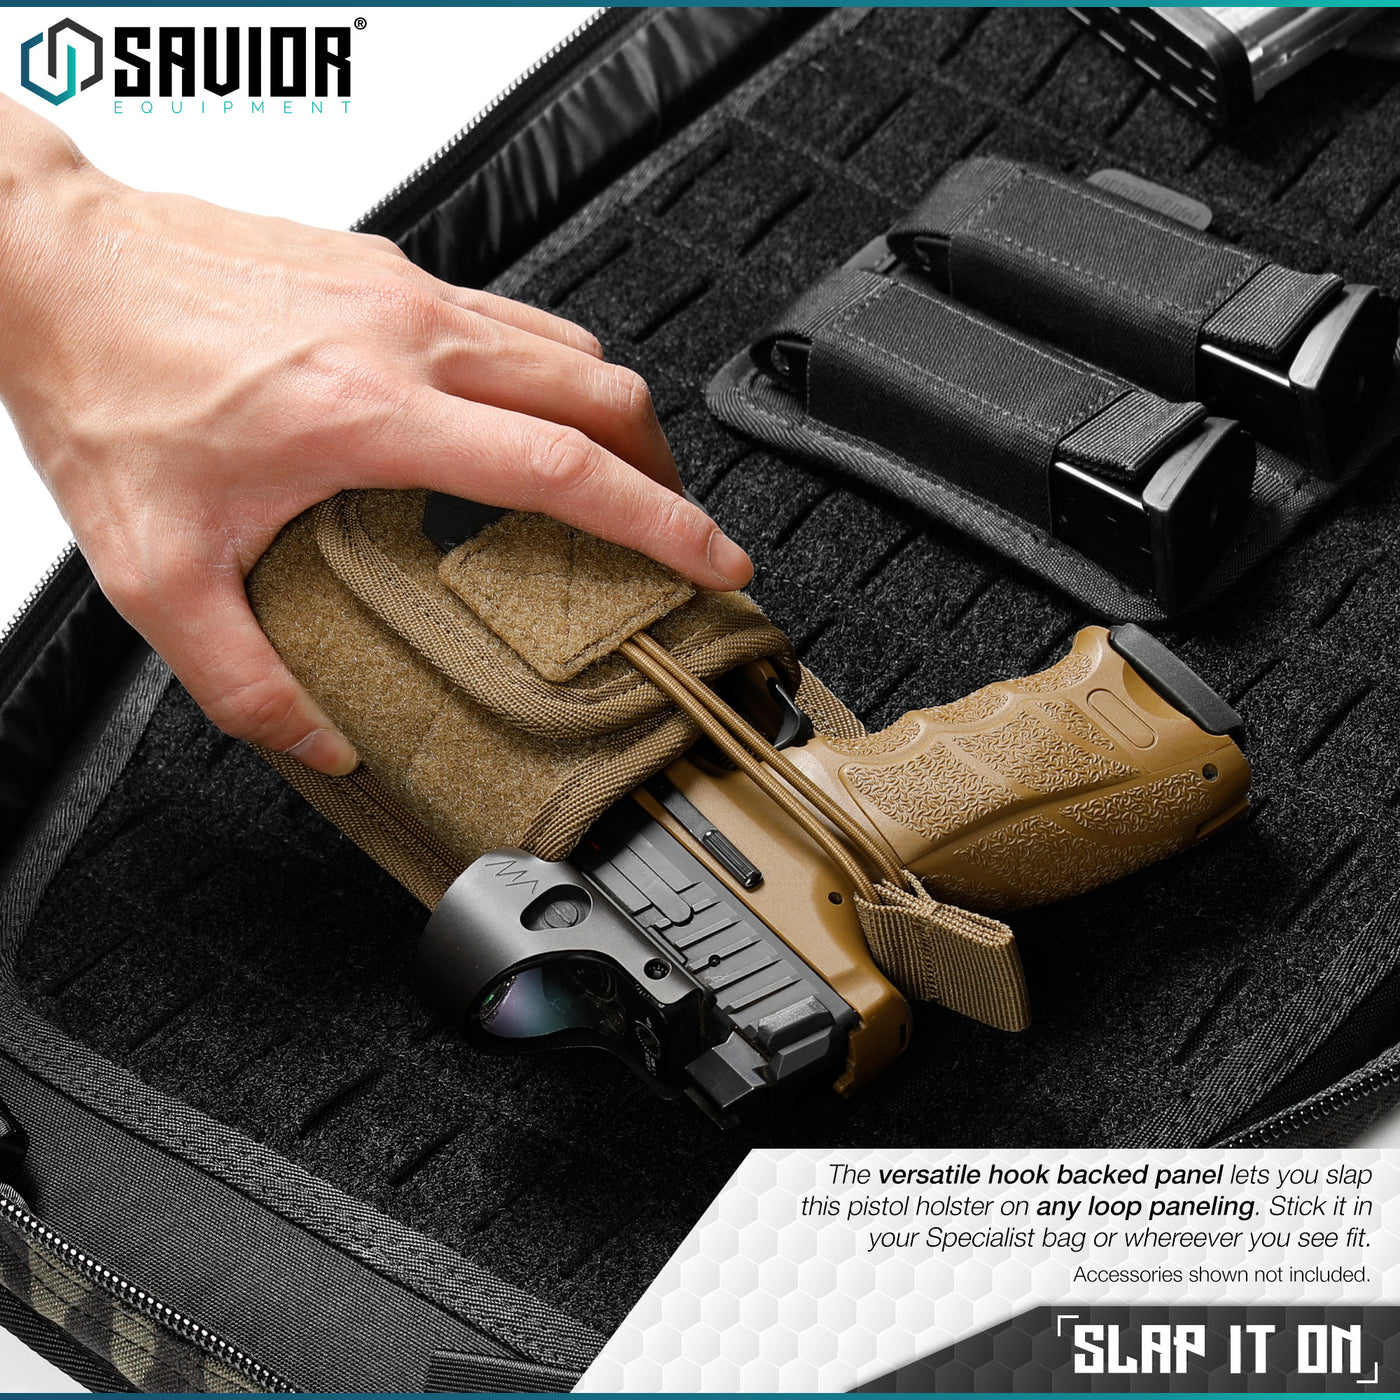 Slap it on - The versatile hook backed panel lets you slap this pistol holster on any loop paneling. Stick it in your Specialist bag or even on your go-to plate carrier. Accessories shown not included.